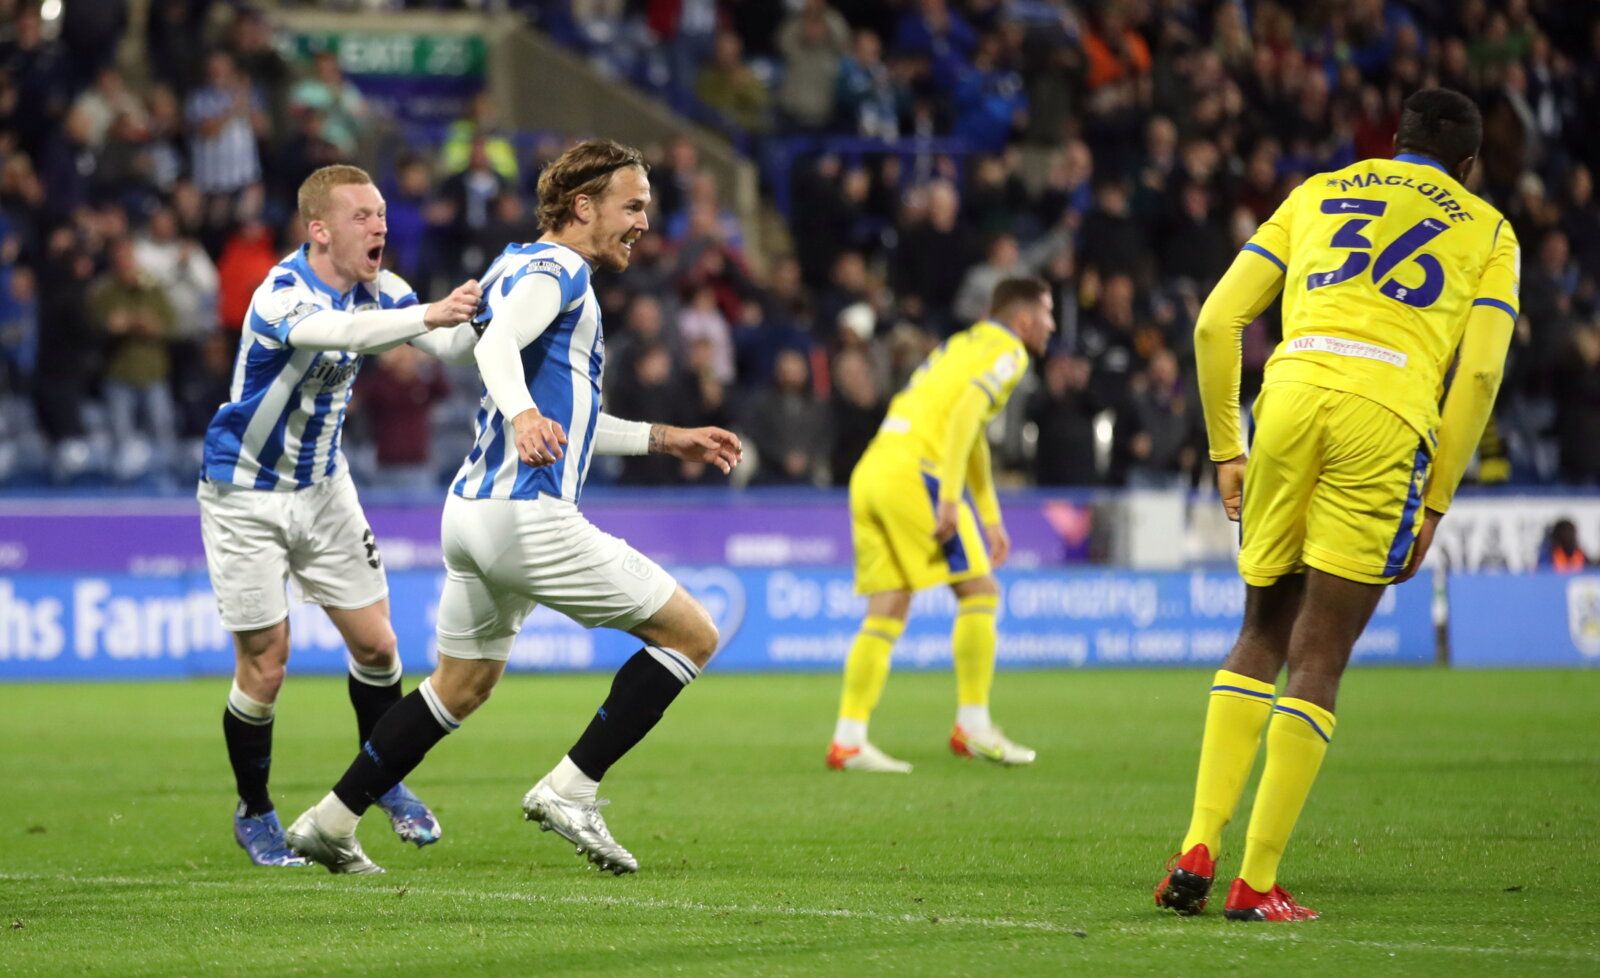 Soccer Football - Championship - Huddersfield Town v Blackburn Rovers - John Smith's Stadium, Huddersfield, Britain - September 28, 2021 Huddersfield Town?s Danny Ward celebrates scoring their second goal  Action Images/Carl Recine  EDITORIAL USE ONLY. No use with unauthorized audio, video, data, fixture lists, club/league logos or 